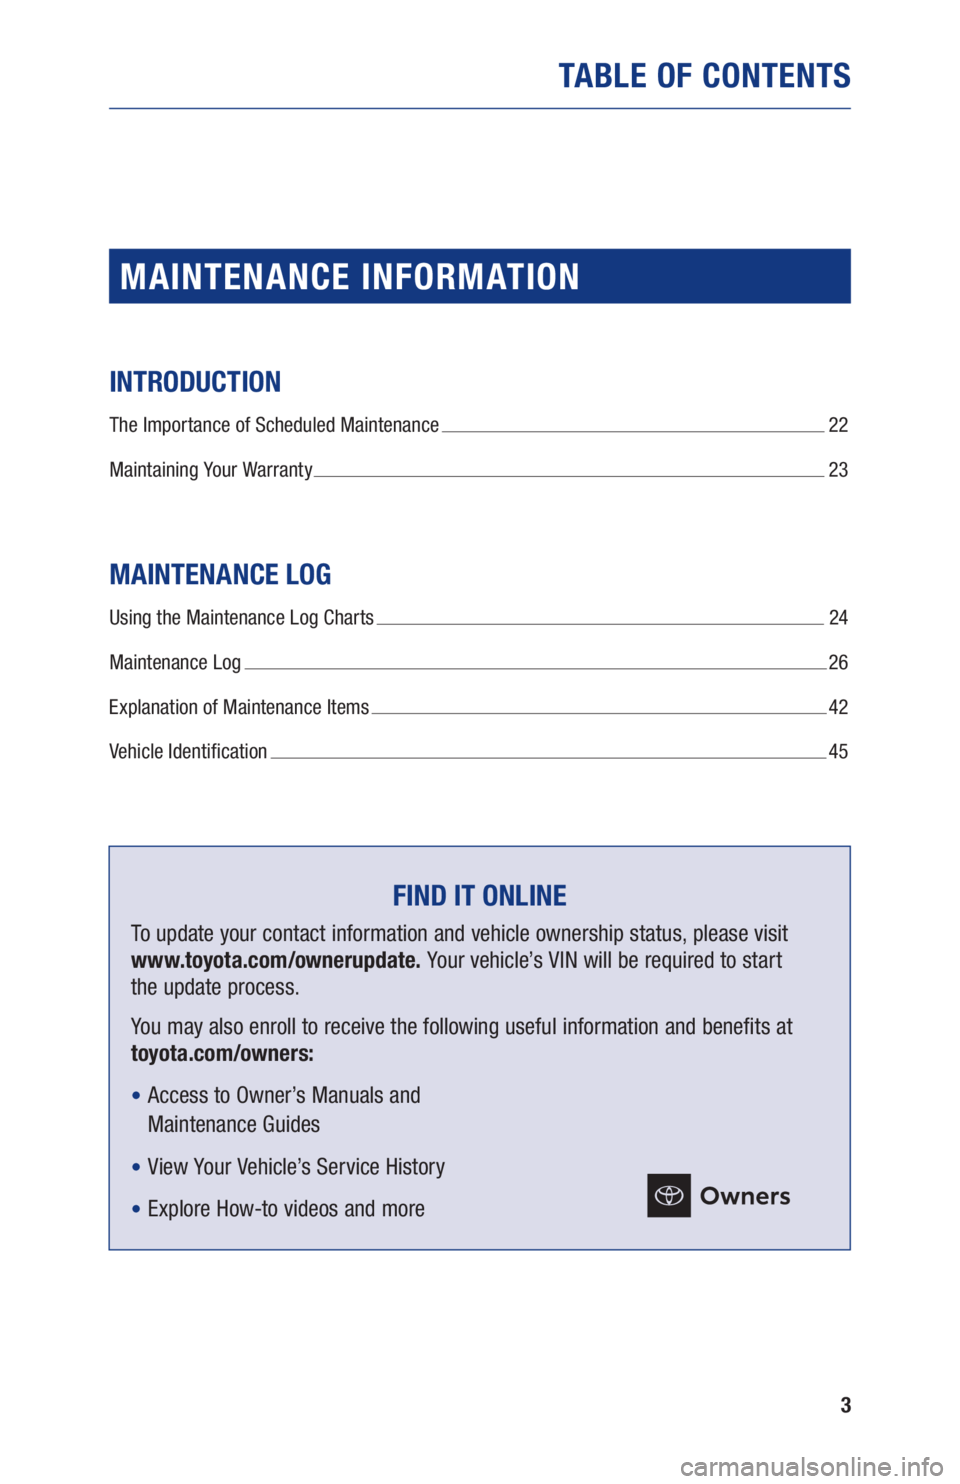 TOYOTA MIRAI 2020  Warranties & Maintenance Guides (in English) 3
TABLE OF CONTENTS
MAINTENANCE INFORMATION
INTRODUCTION
The Importance of Scheduled Maintenance  22
Maintaining Your Warranty 
 23
MAINTENANCE LOG
Using the Maintenance Log Charts  24
Maintenance Log